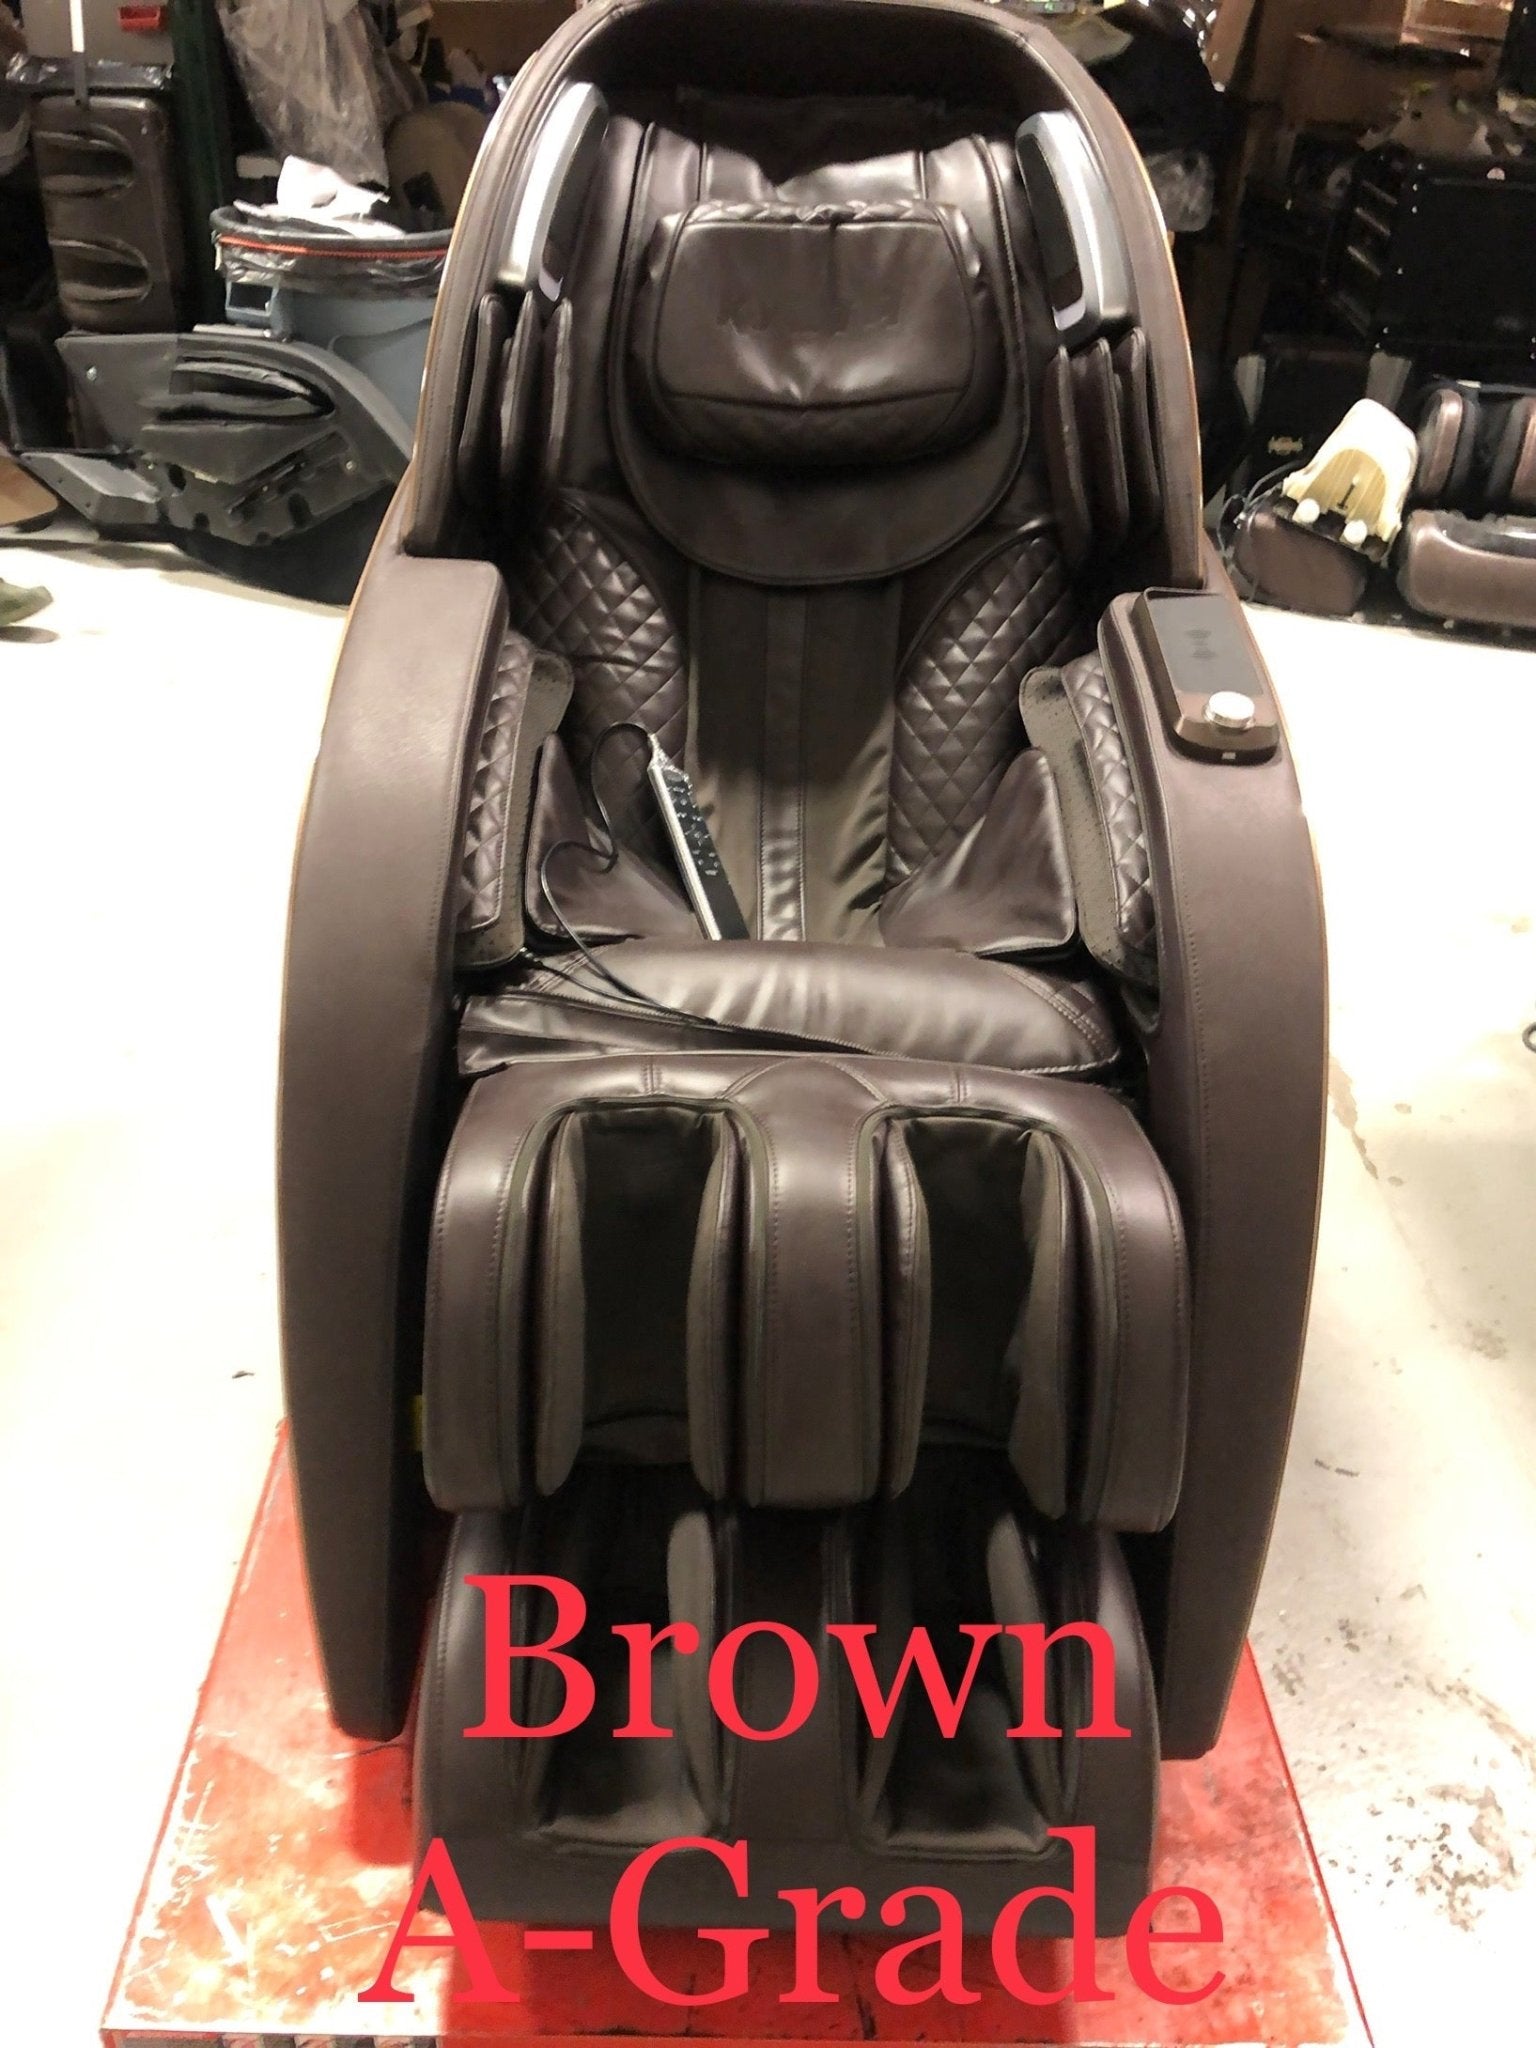 KyotaMassage ChairsKyota Yutaka M898 4D (Certified Pre-Owned)BrownMassage Chair Heaven